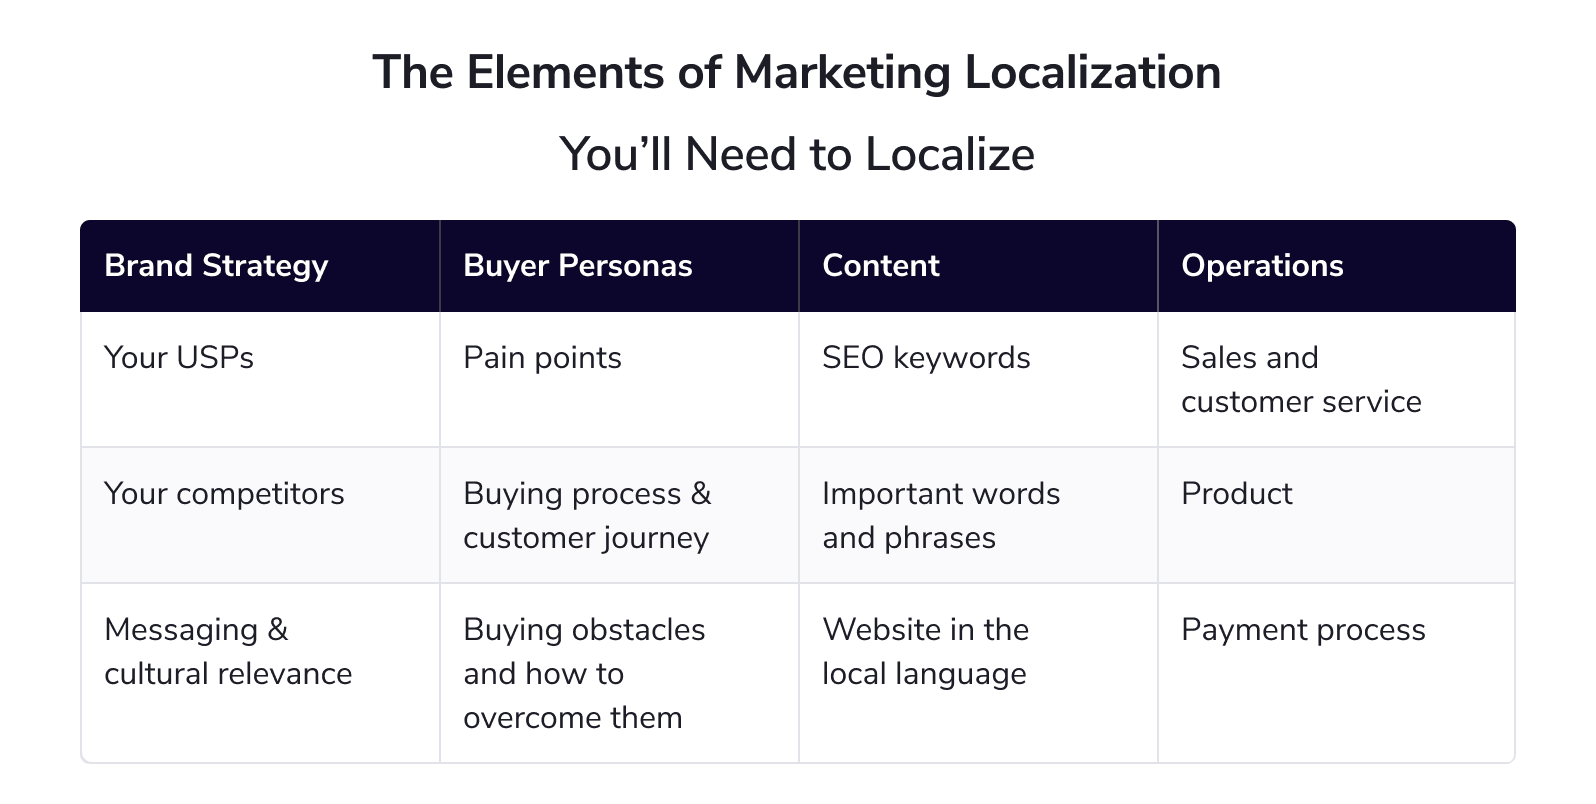 The elements of marketing localization